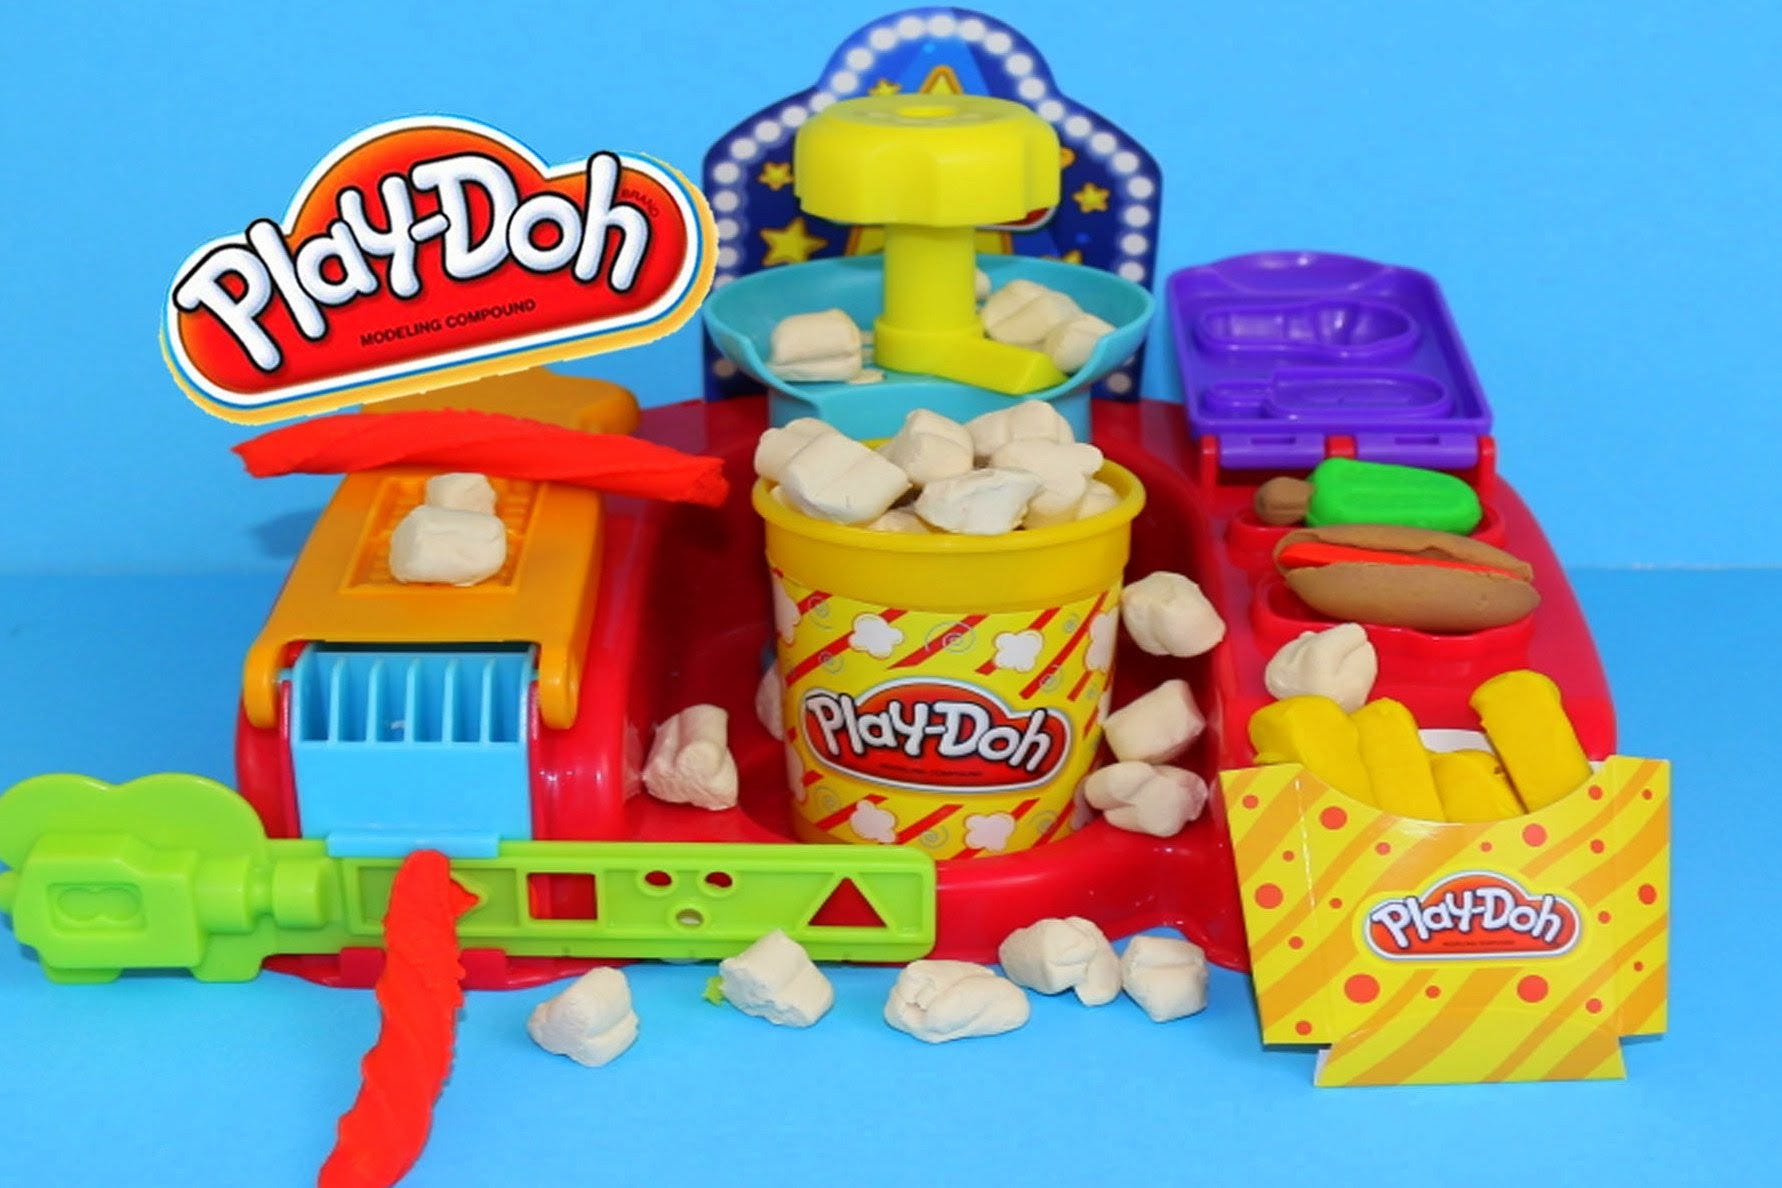 play doh video games